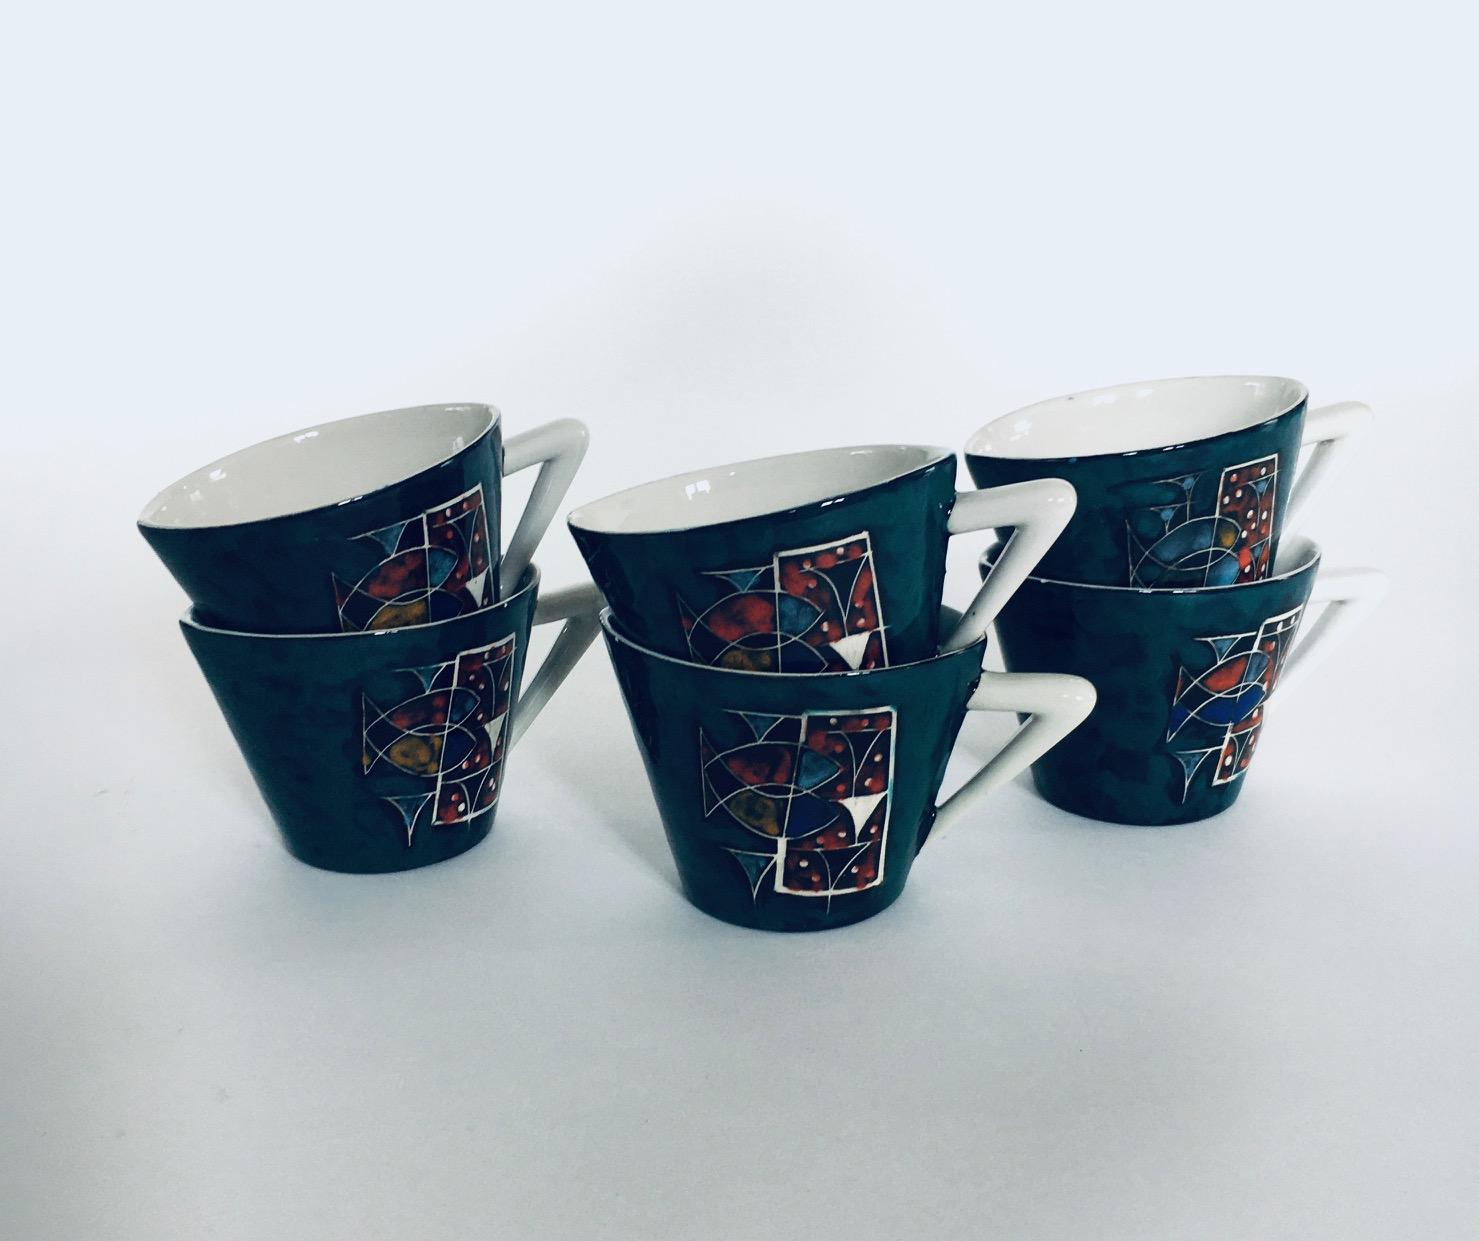 Midcentury Modern Art Ceramic Tea or Coffee Service Set by CEMAS, Italy 1950's For Sale 10